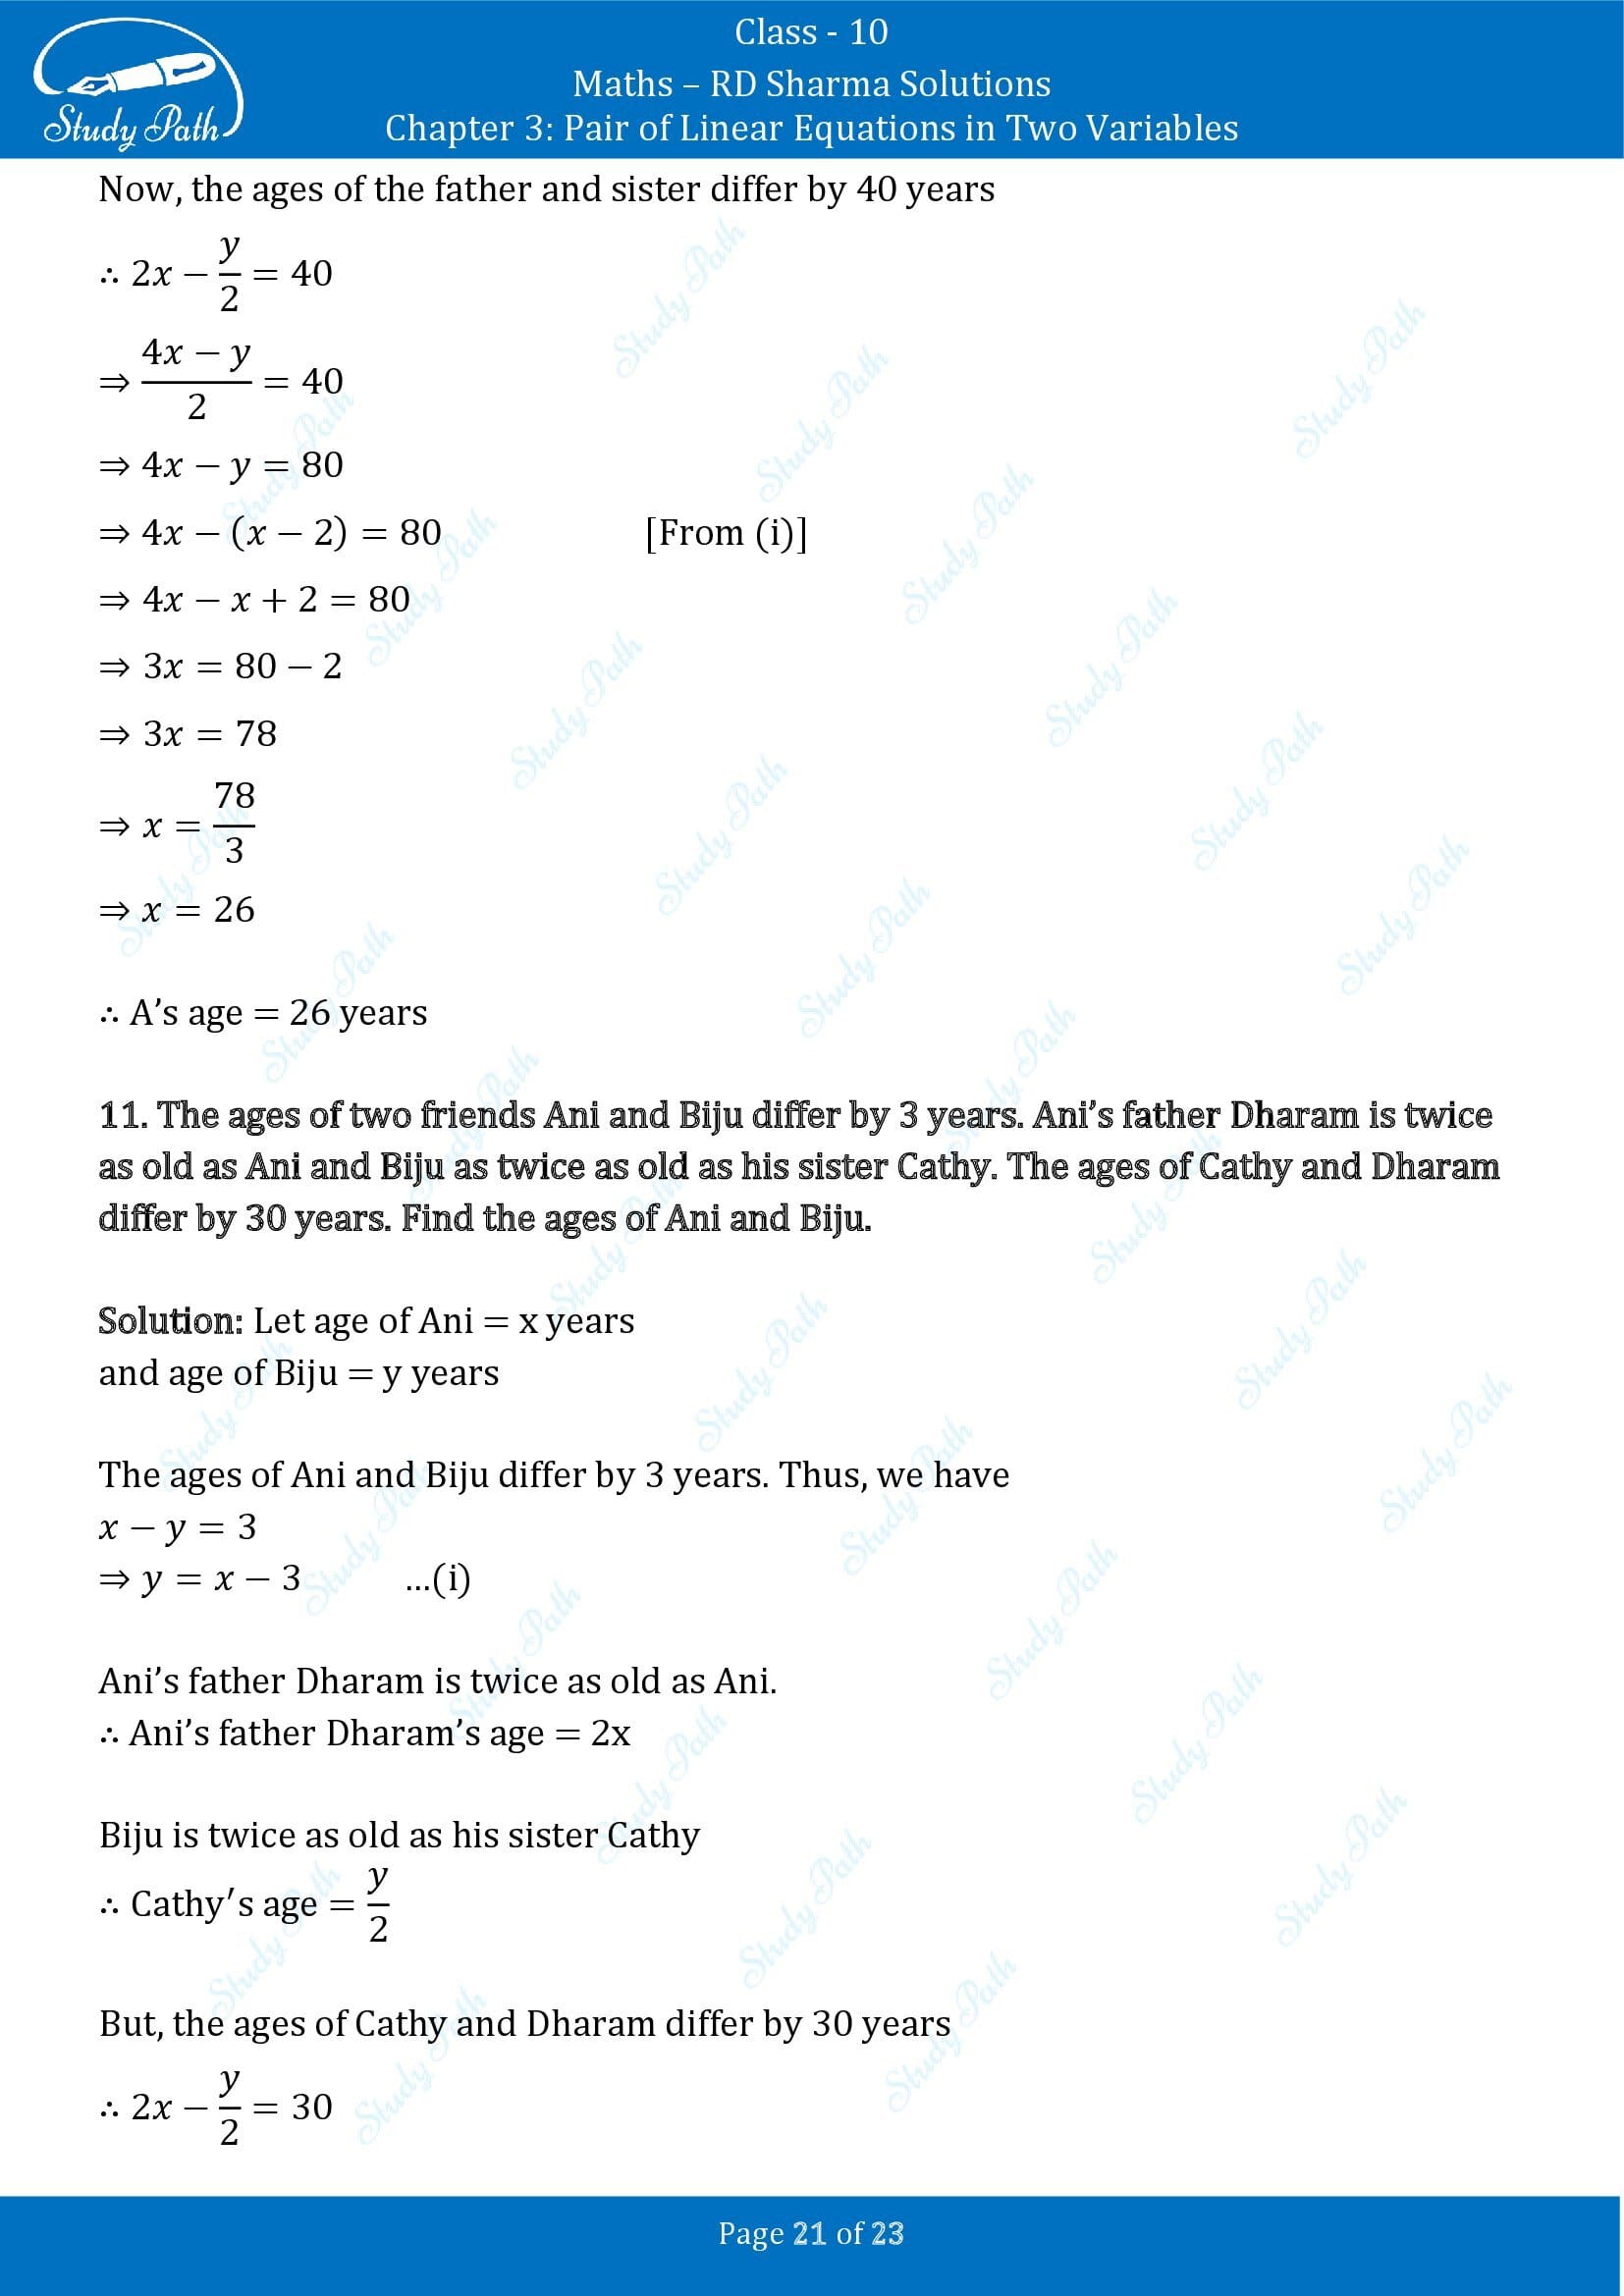 RD Sharma Solutions Class 10 Chapter 3 Pair of Linear Equations in Two Variables Exercise 3.8 00021